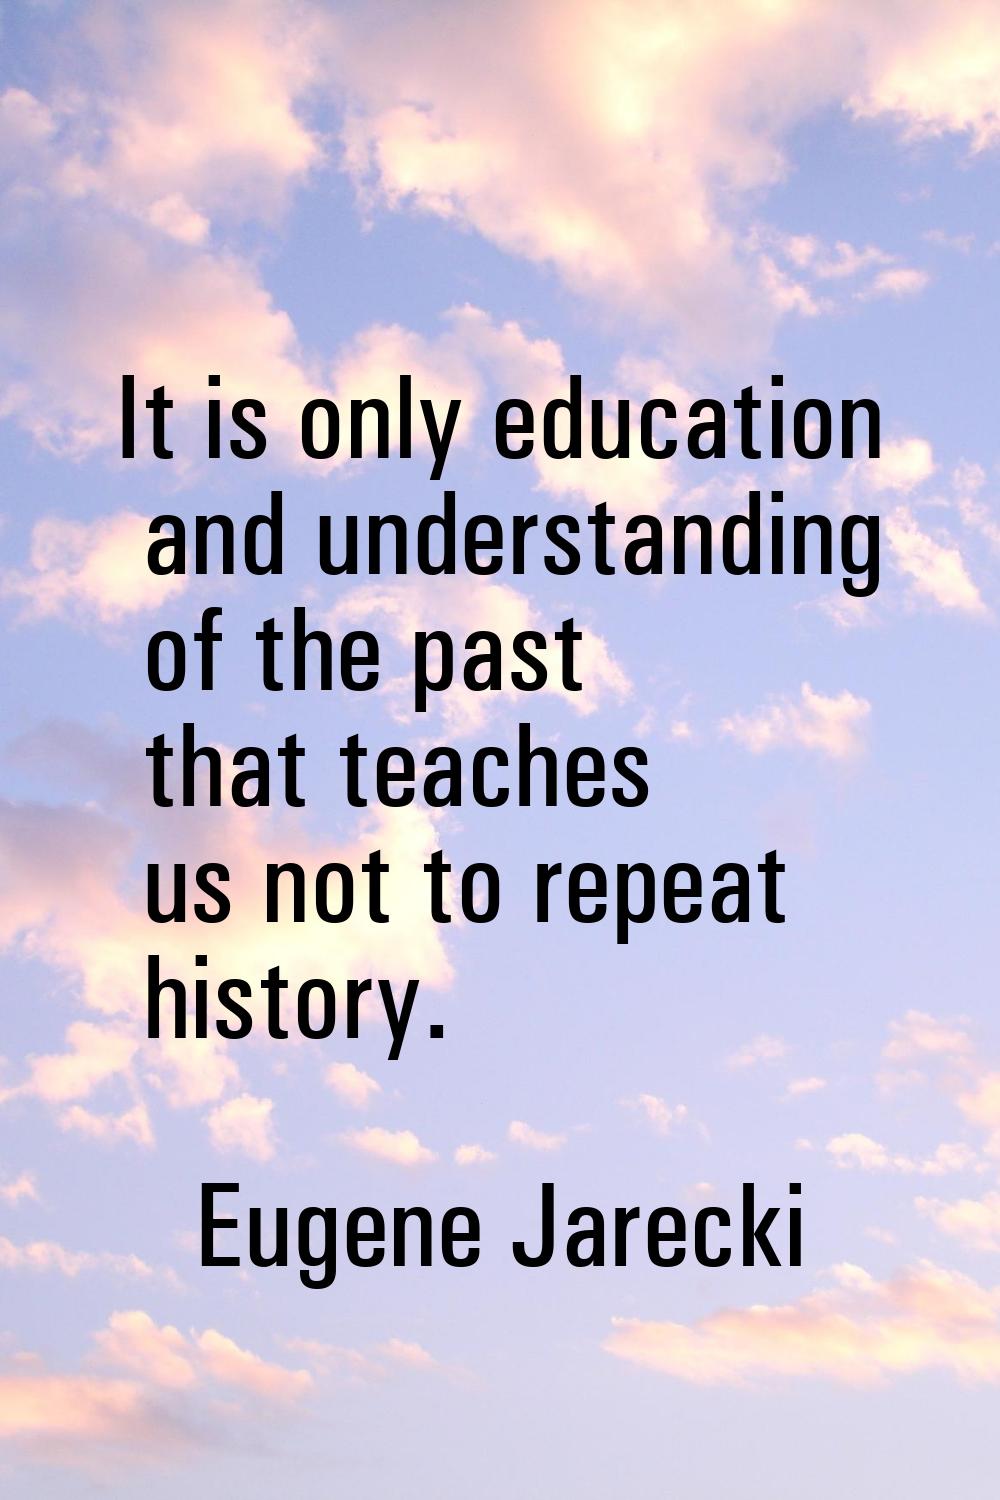 It is only education and understanding of the past that teaches us not to repeat history.